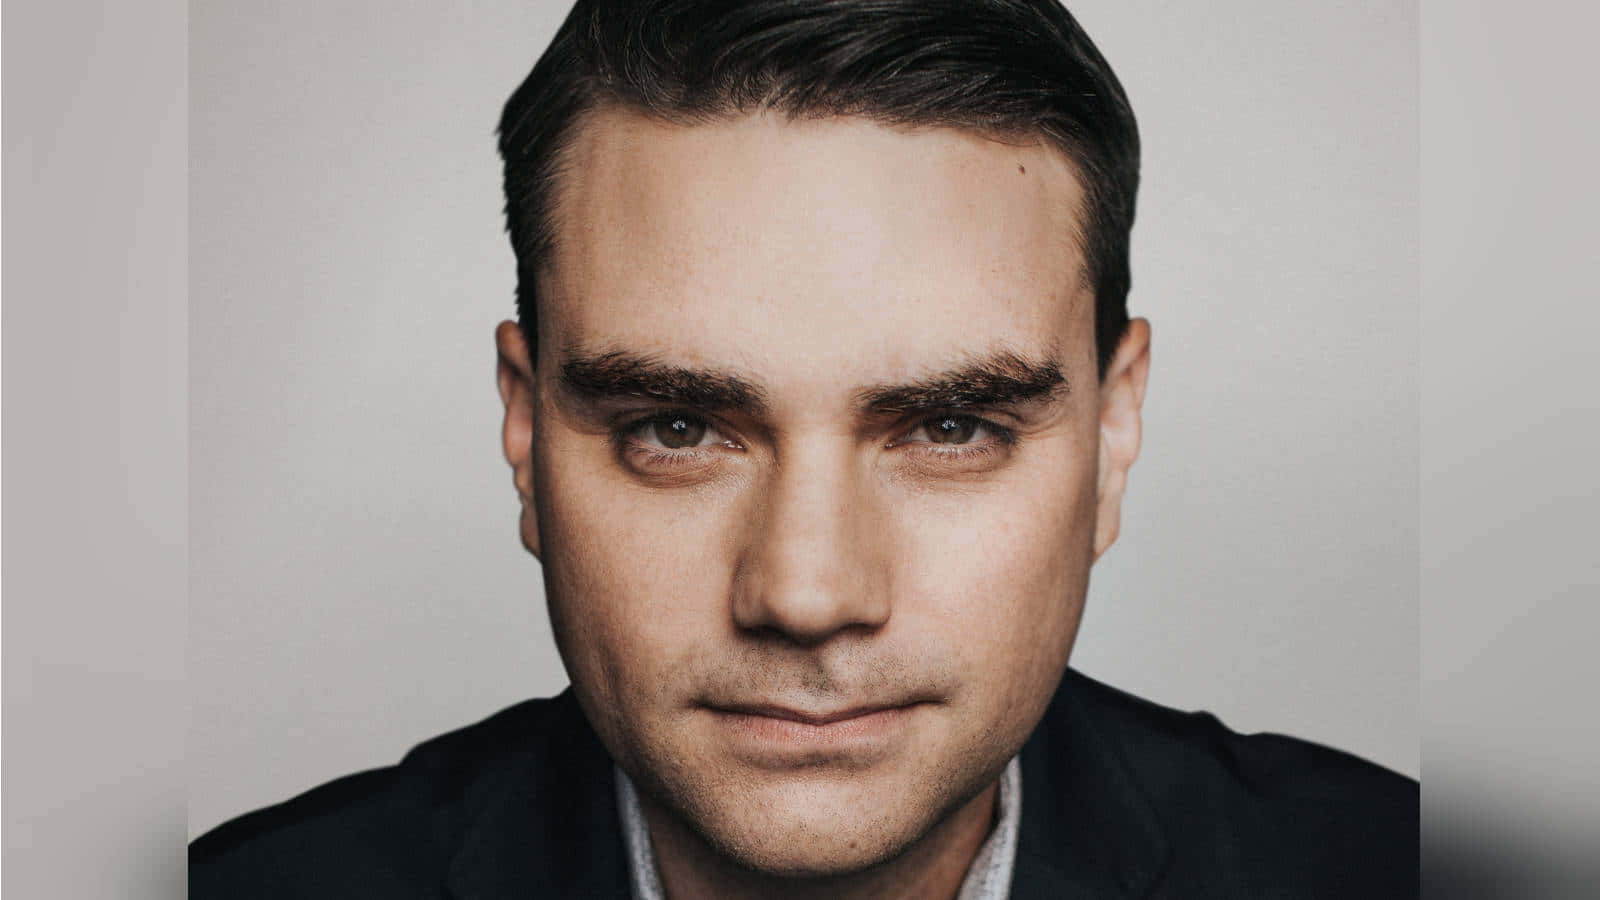 Ben Shapiro, American commentator and lawyer